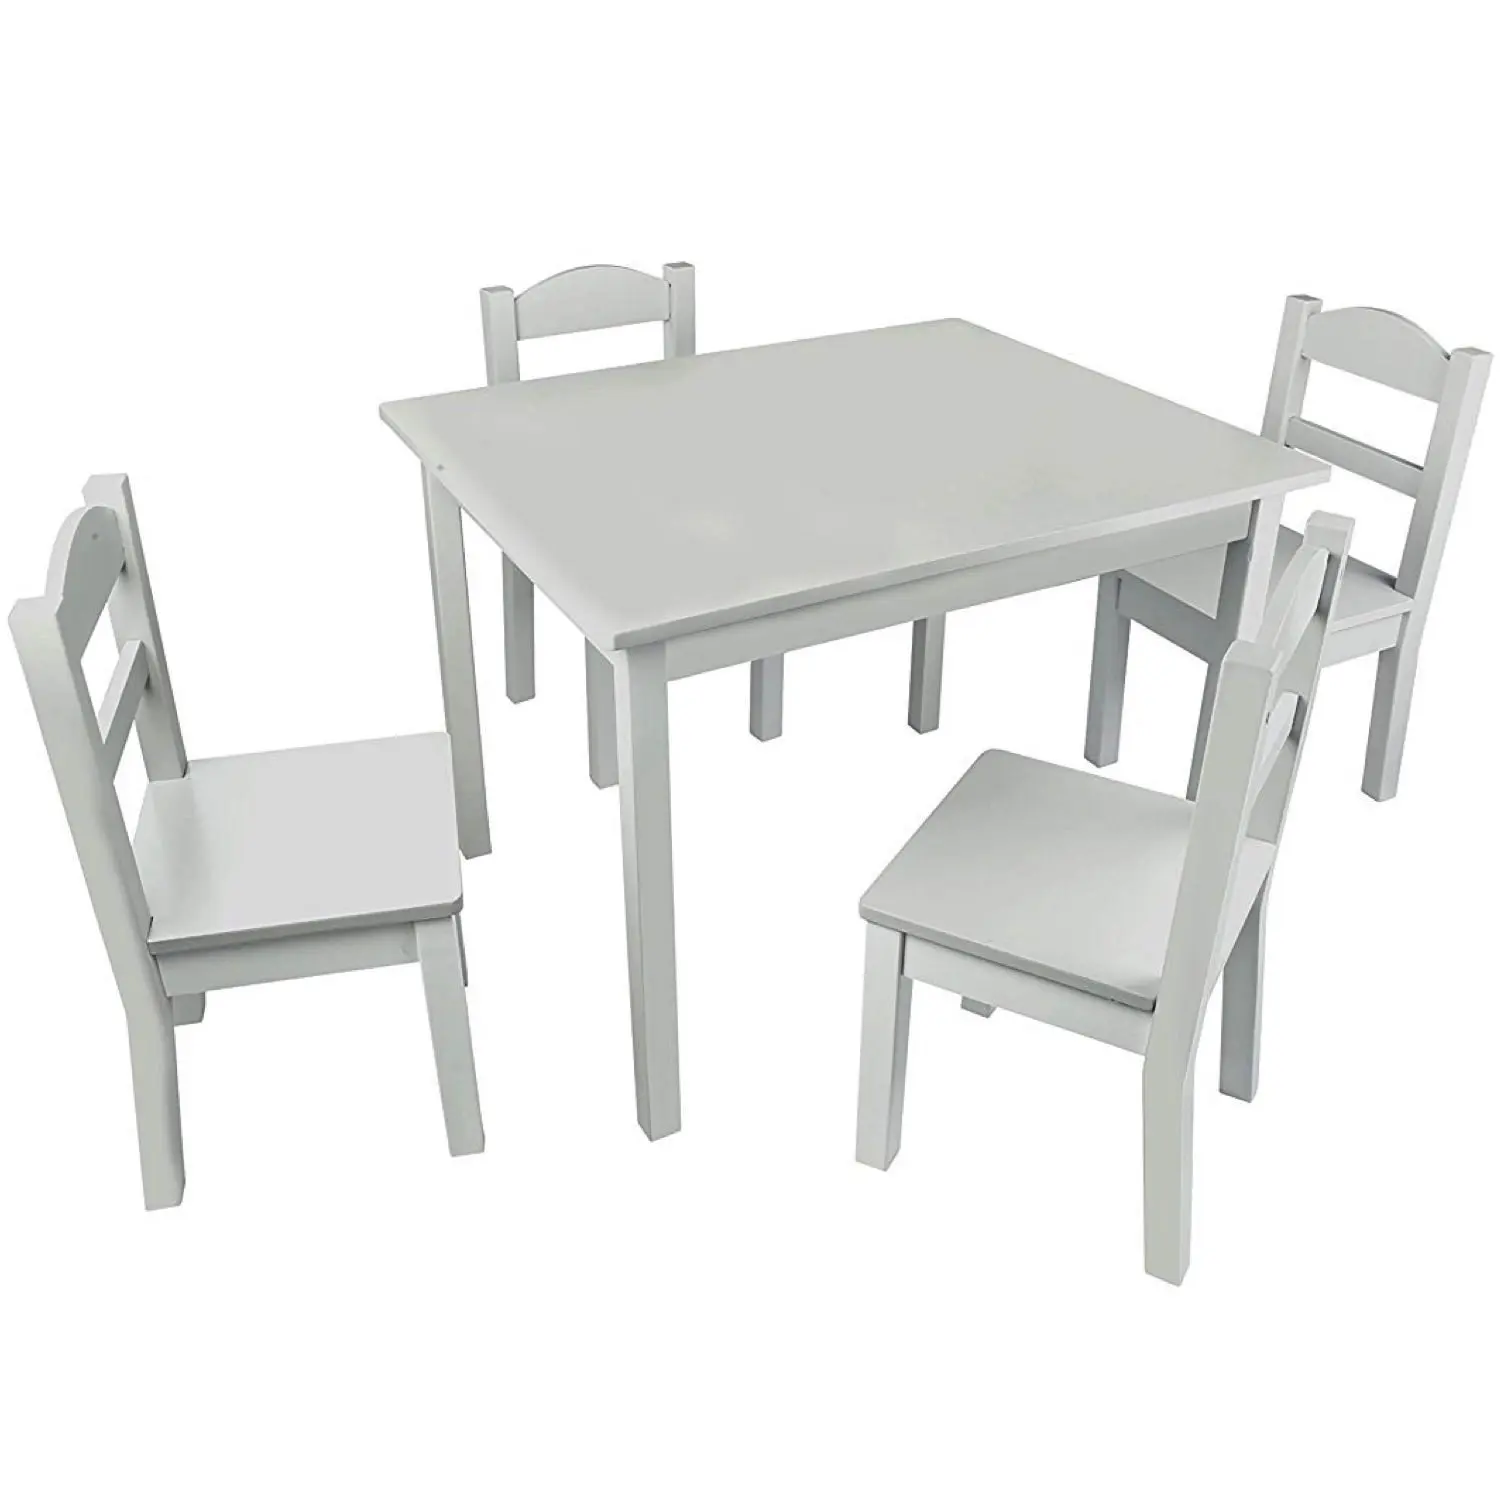 hobbycraft childrens table and chairs